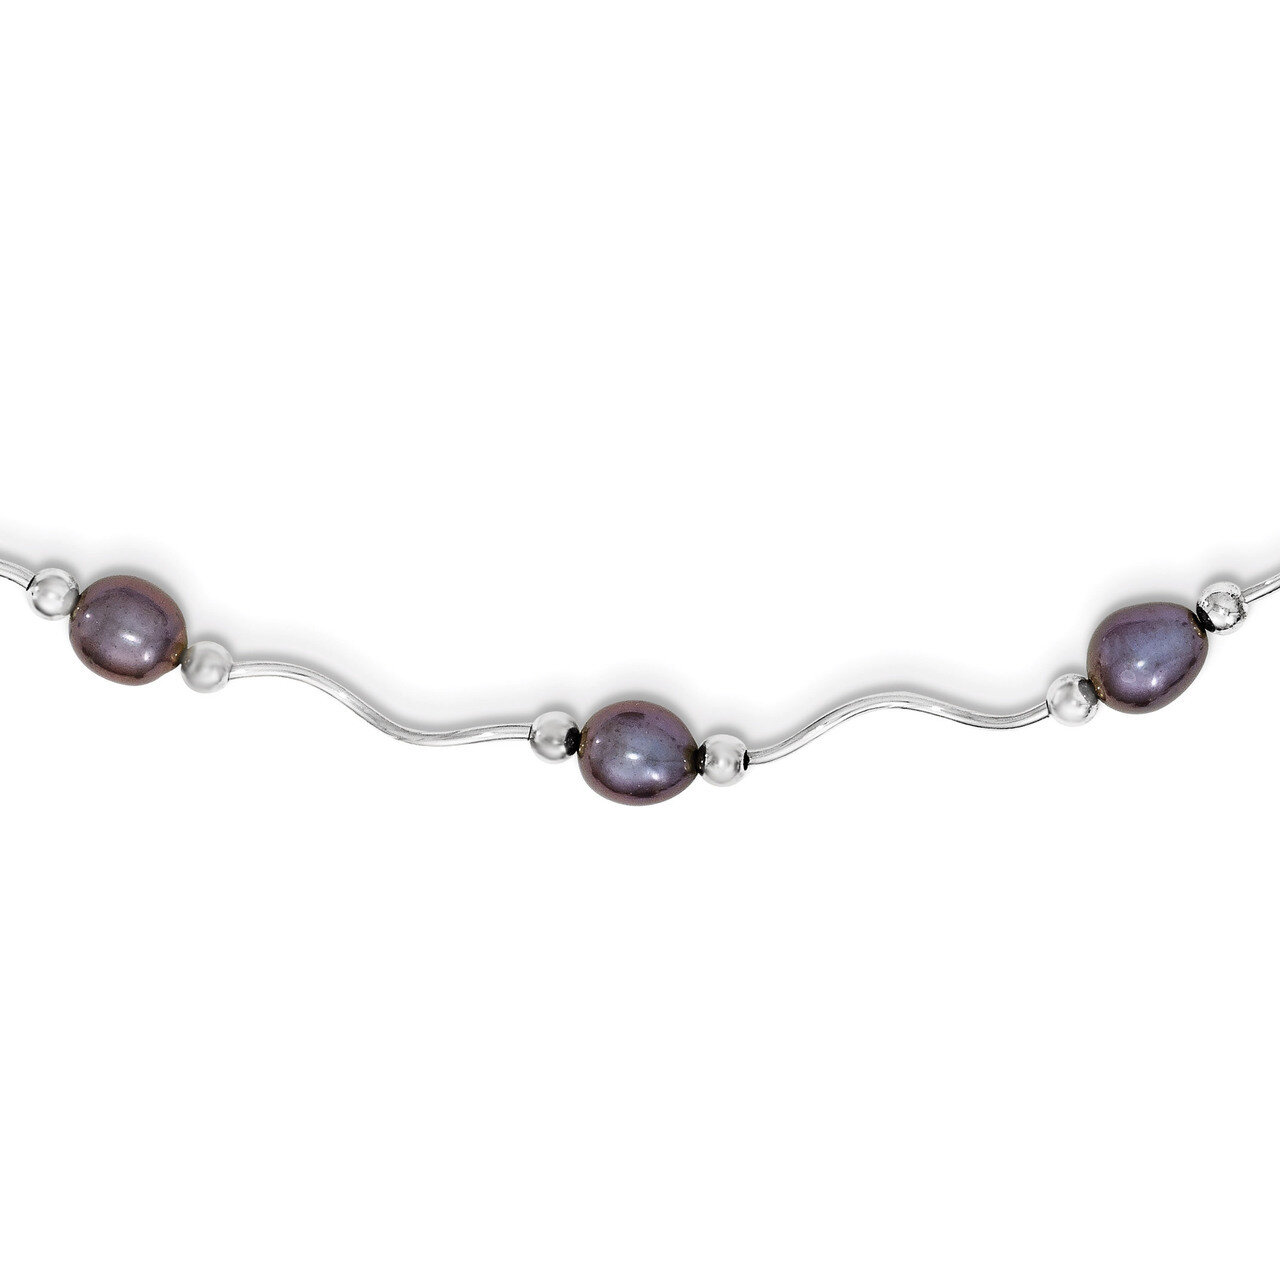 6-7mm Black Cultured Pearl Necklace Sterling Silver QH4854-18